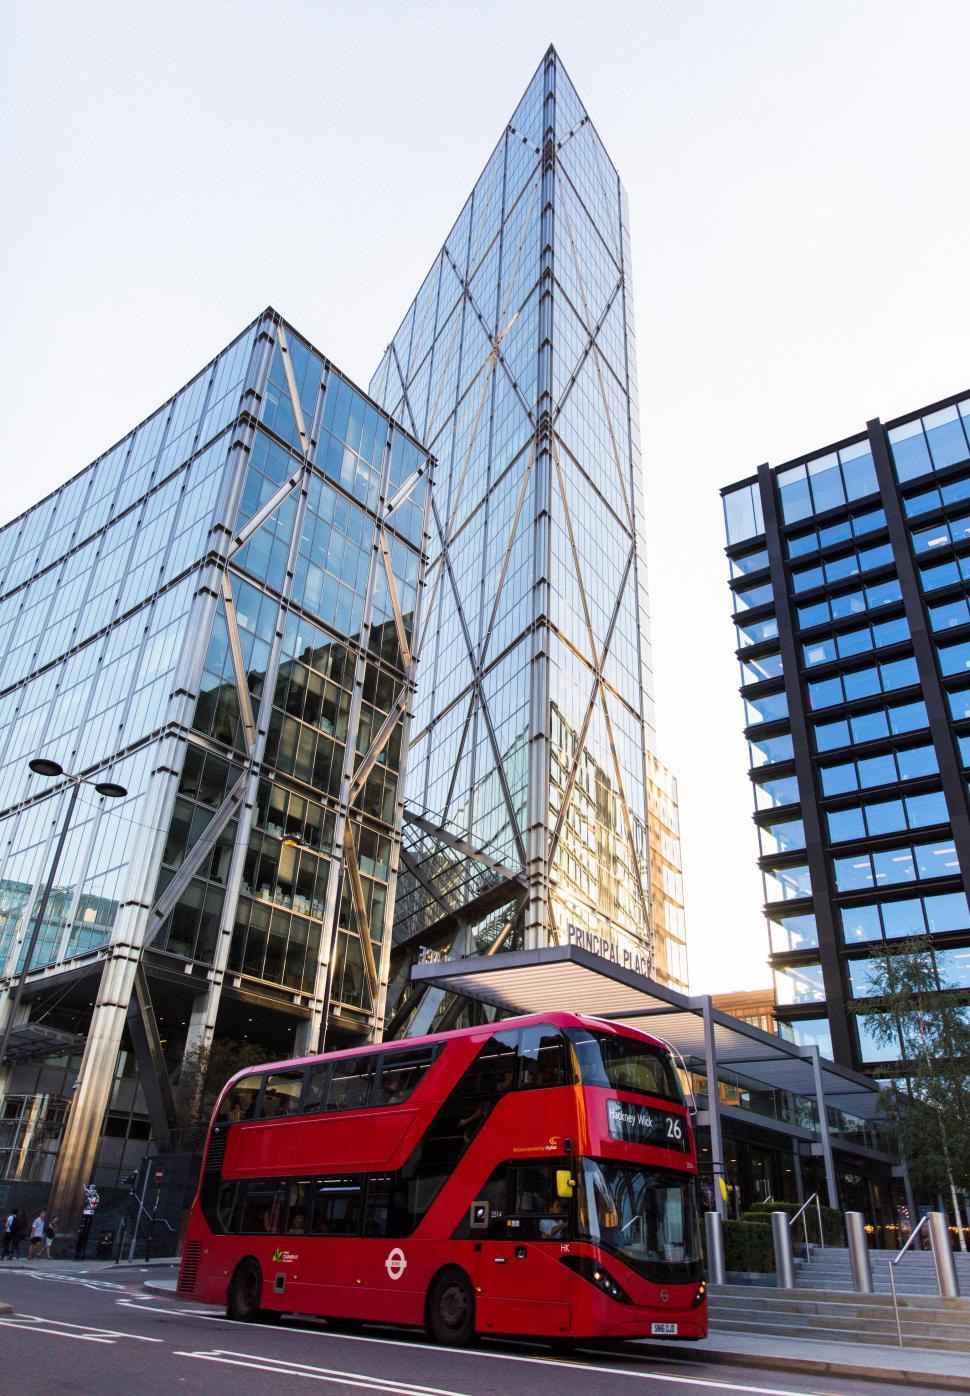 Free Image of A double decker bus in front of a tall building 